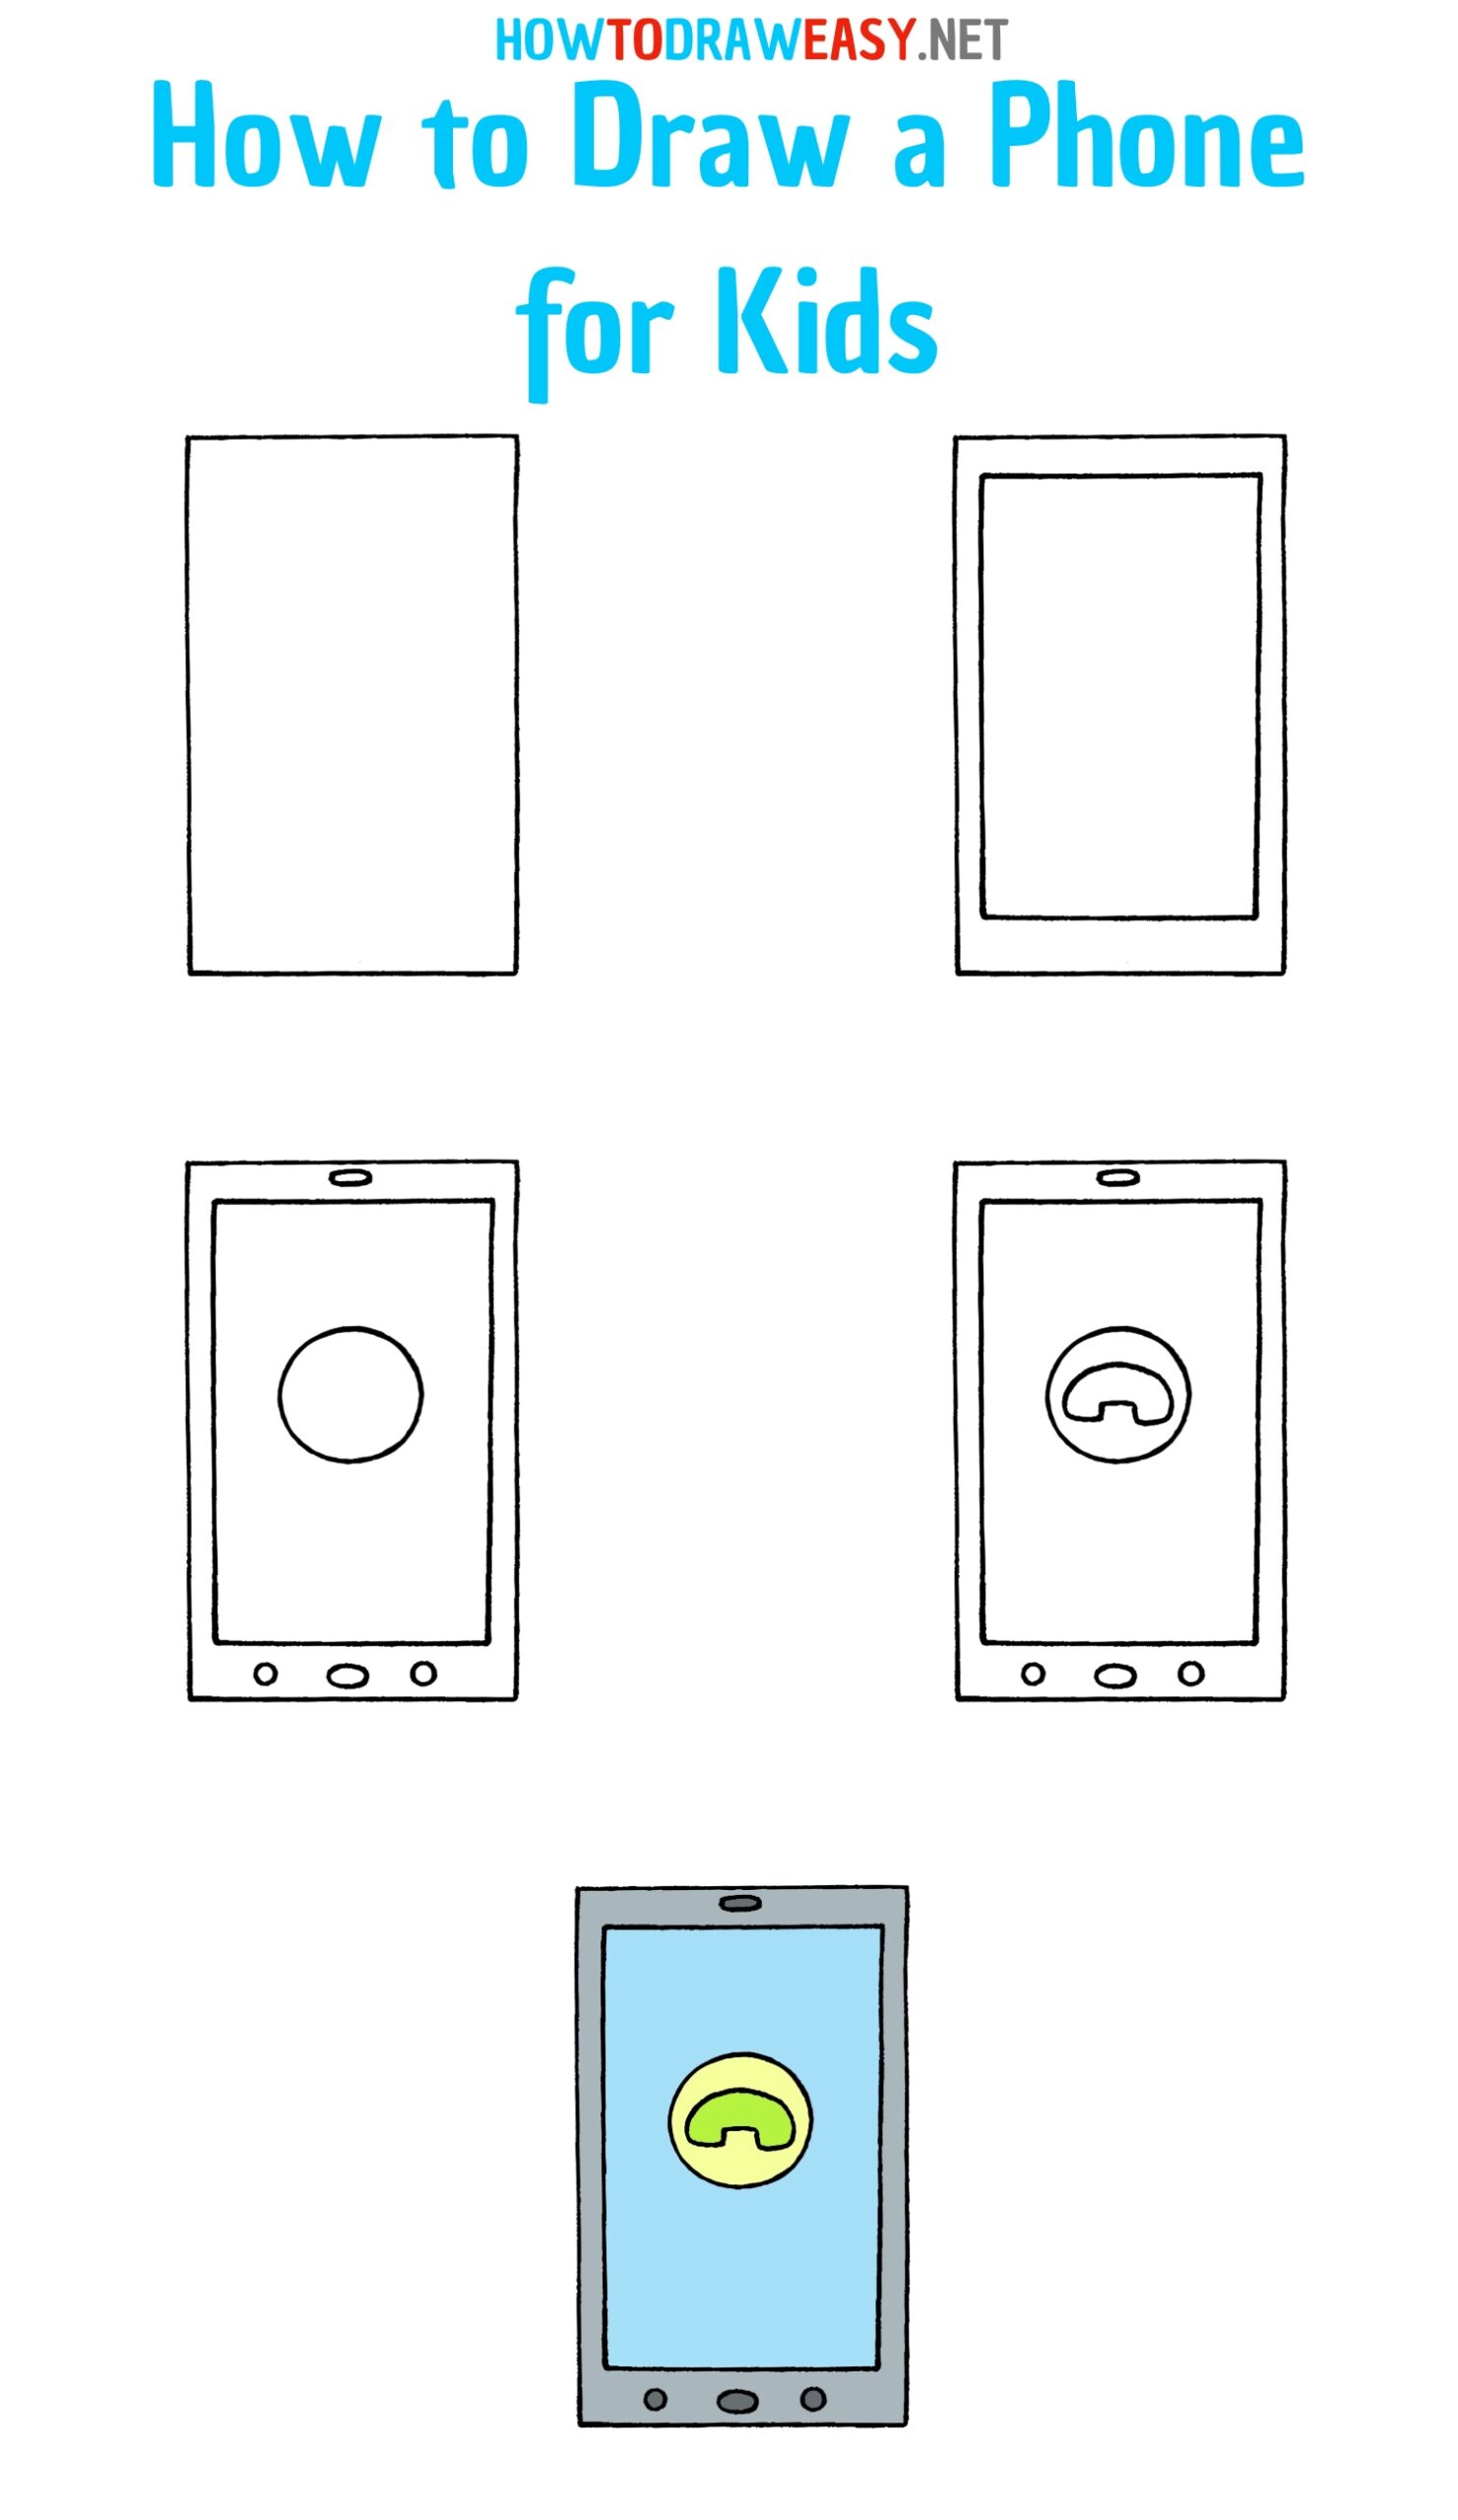 How to Draw a Phone for Kids Step by Step